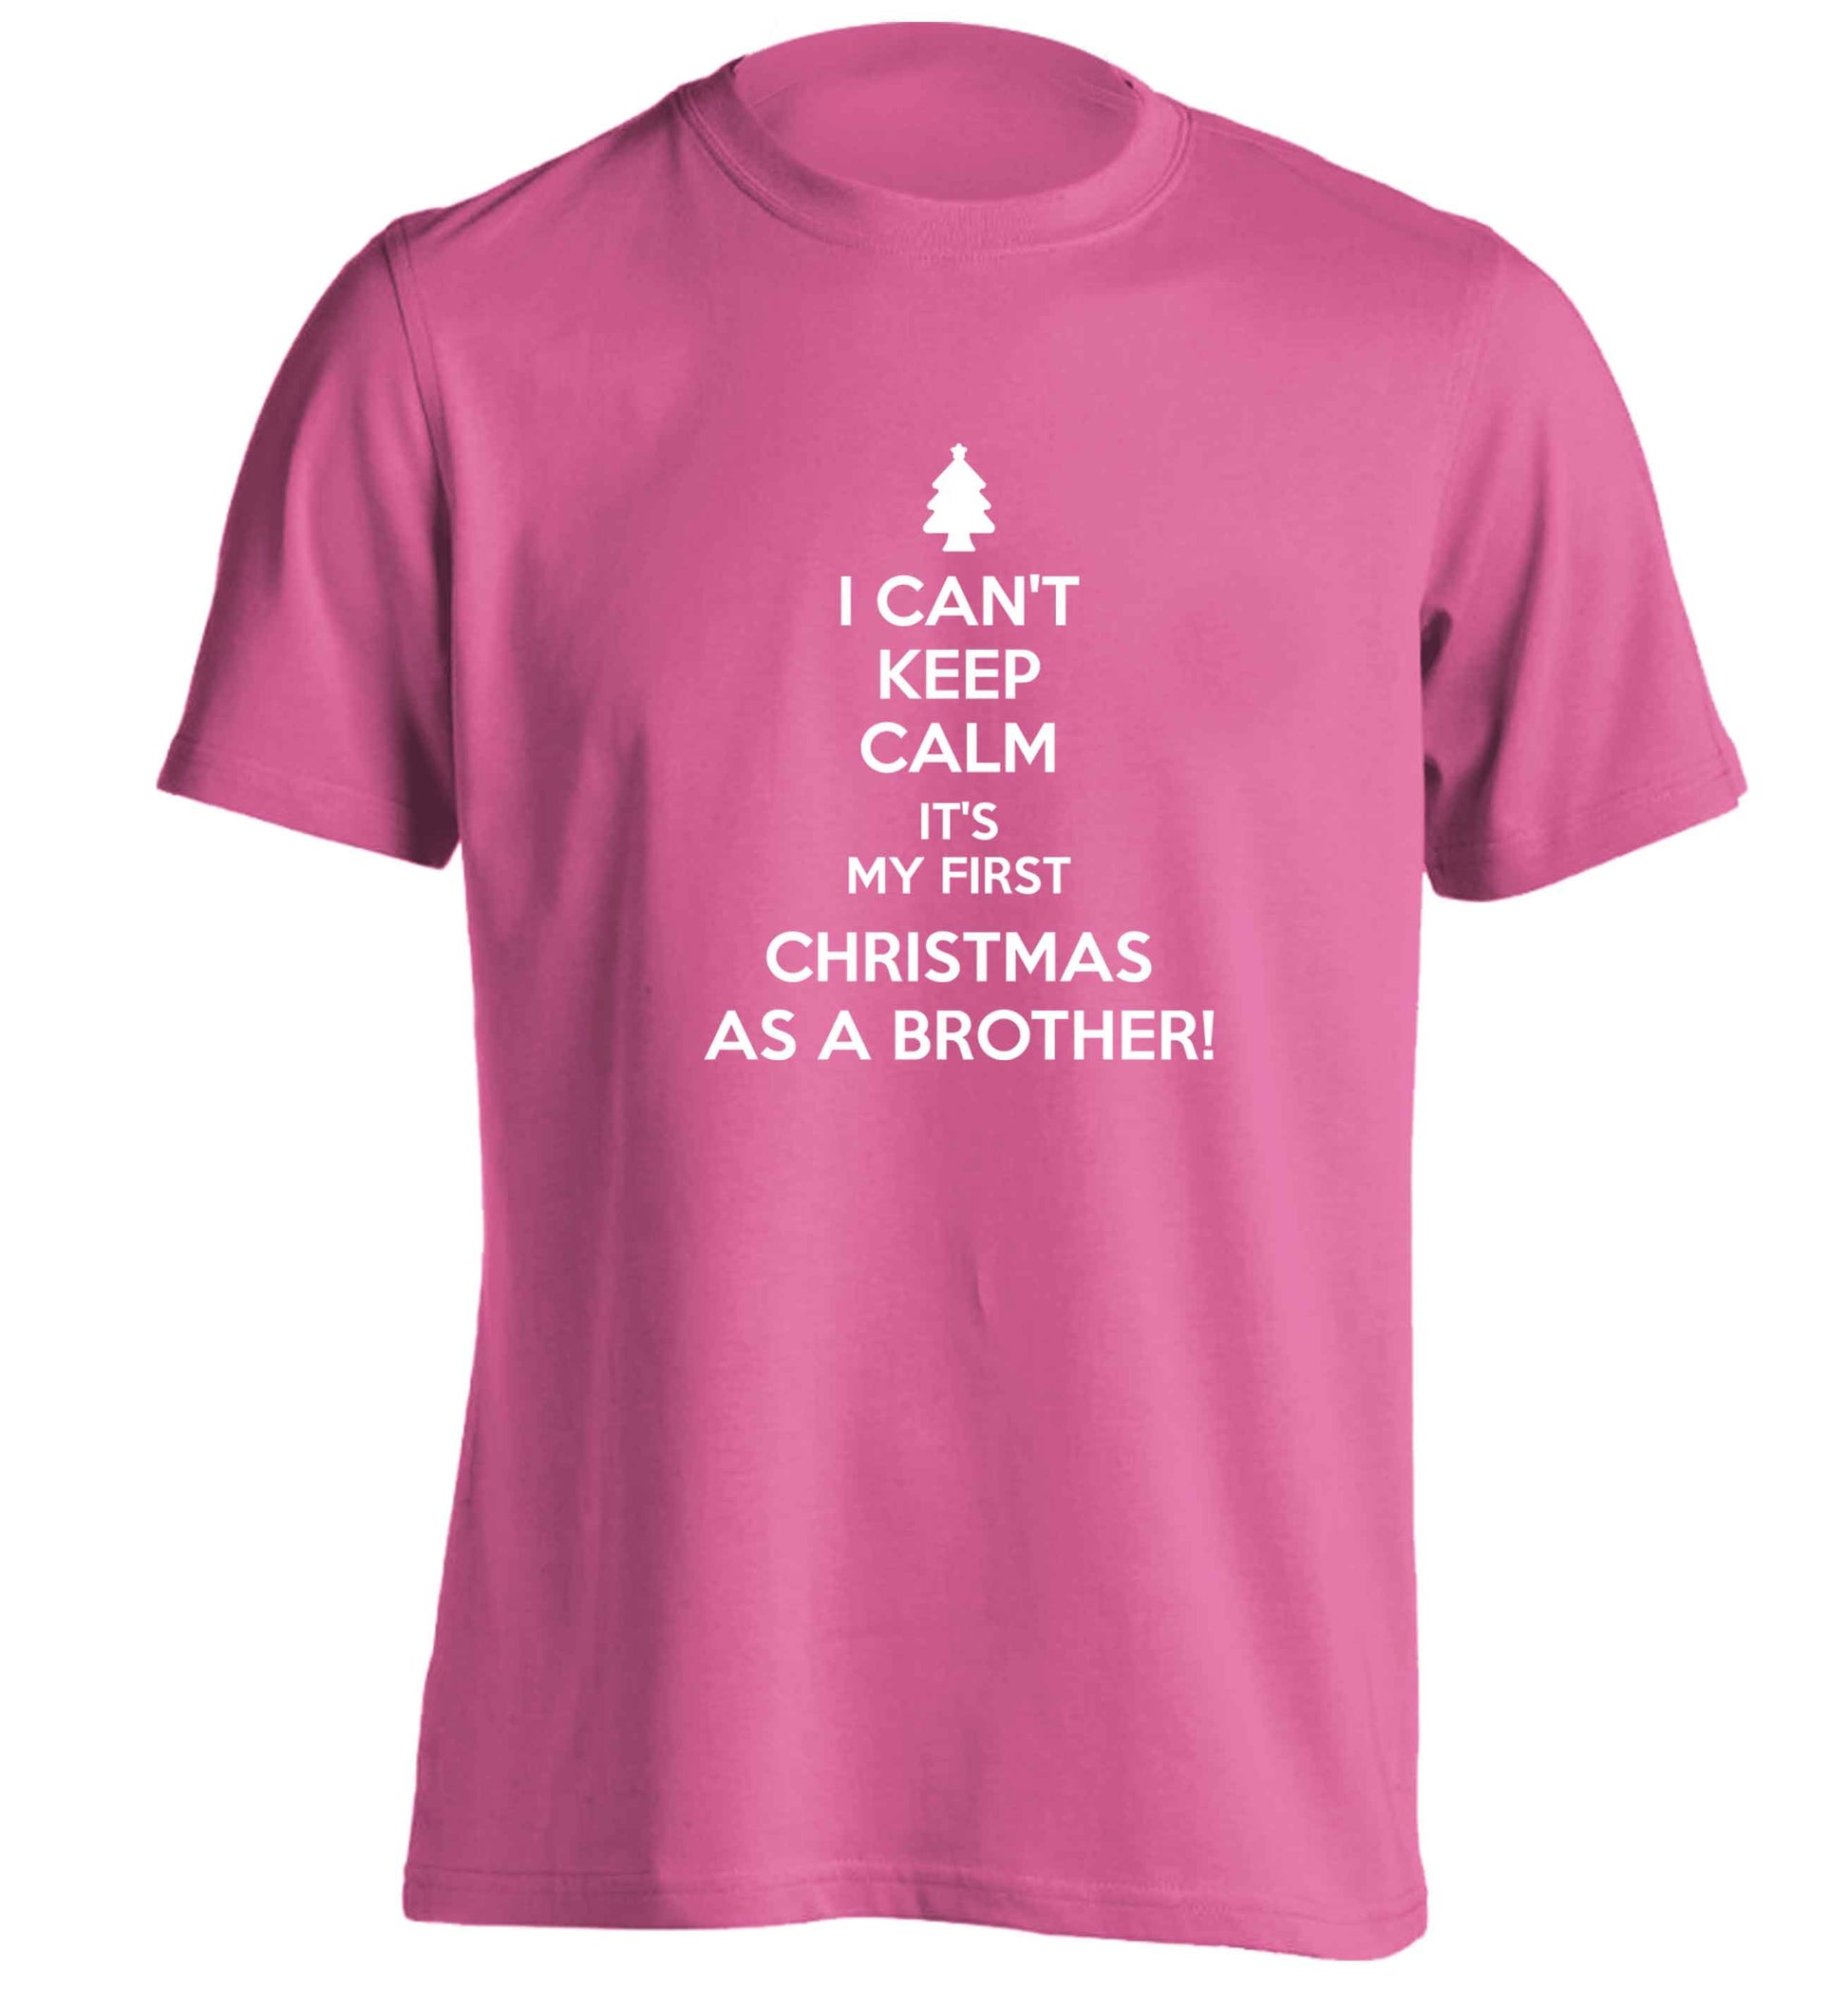 I can't keep calm it's my first Christmas as a brother! adults unisex pink Tshirt 2XL